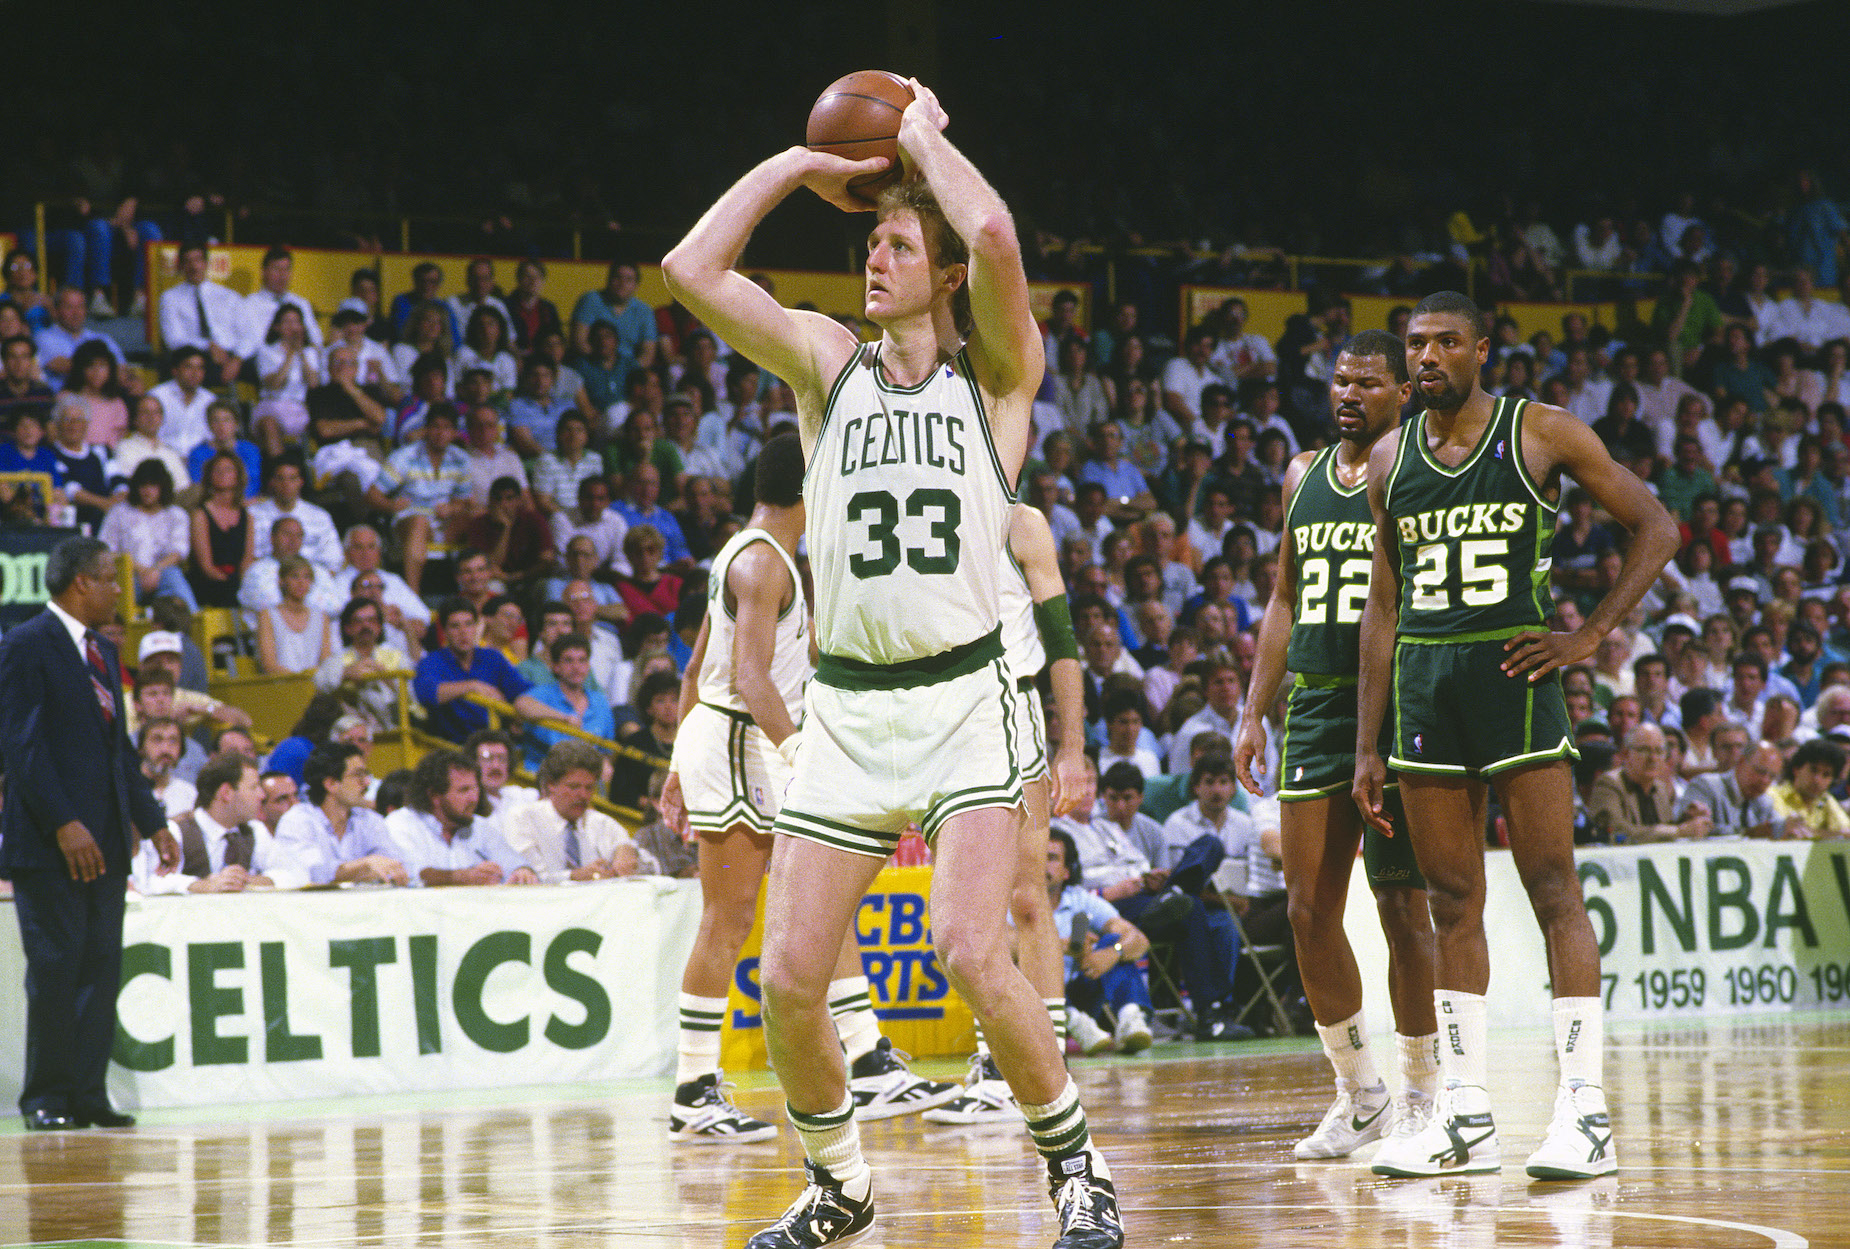 Even at the height of his success with the Boston Celtics, Larry Bird never forgot what it felt like to grow up poor.